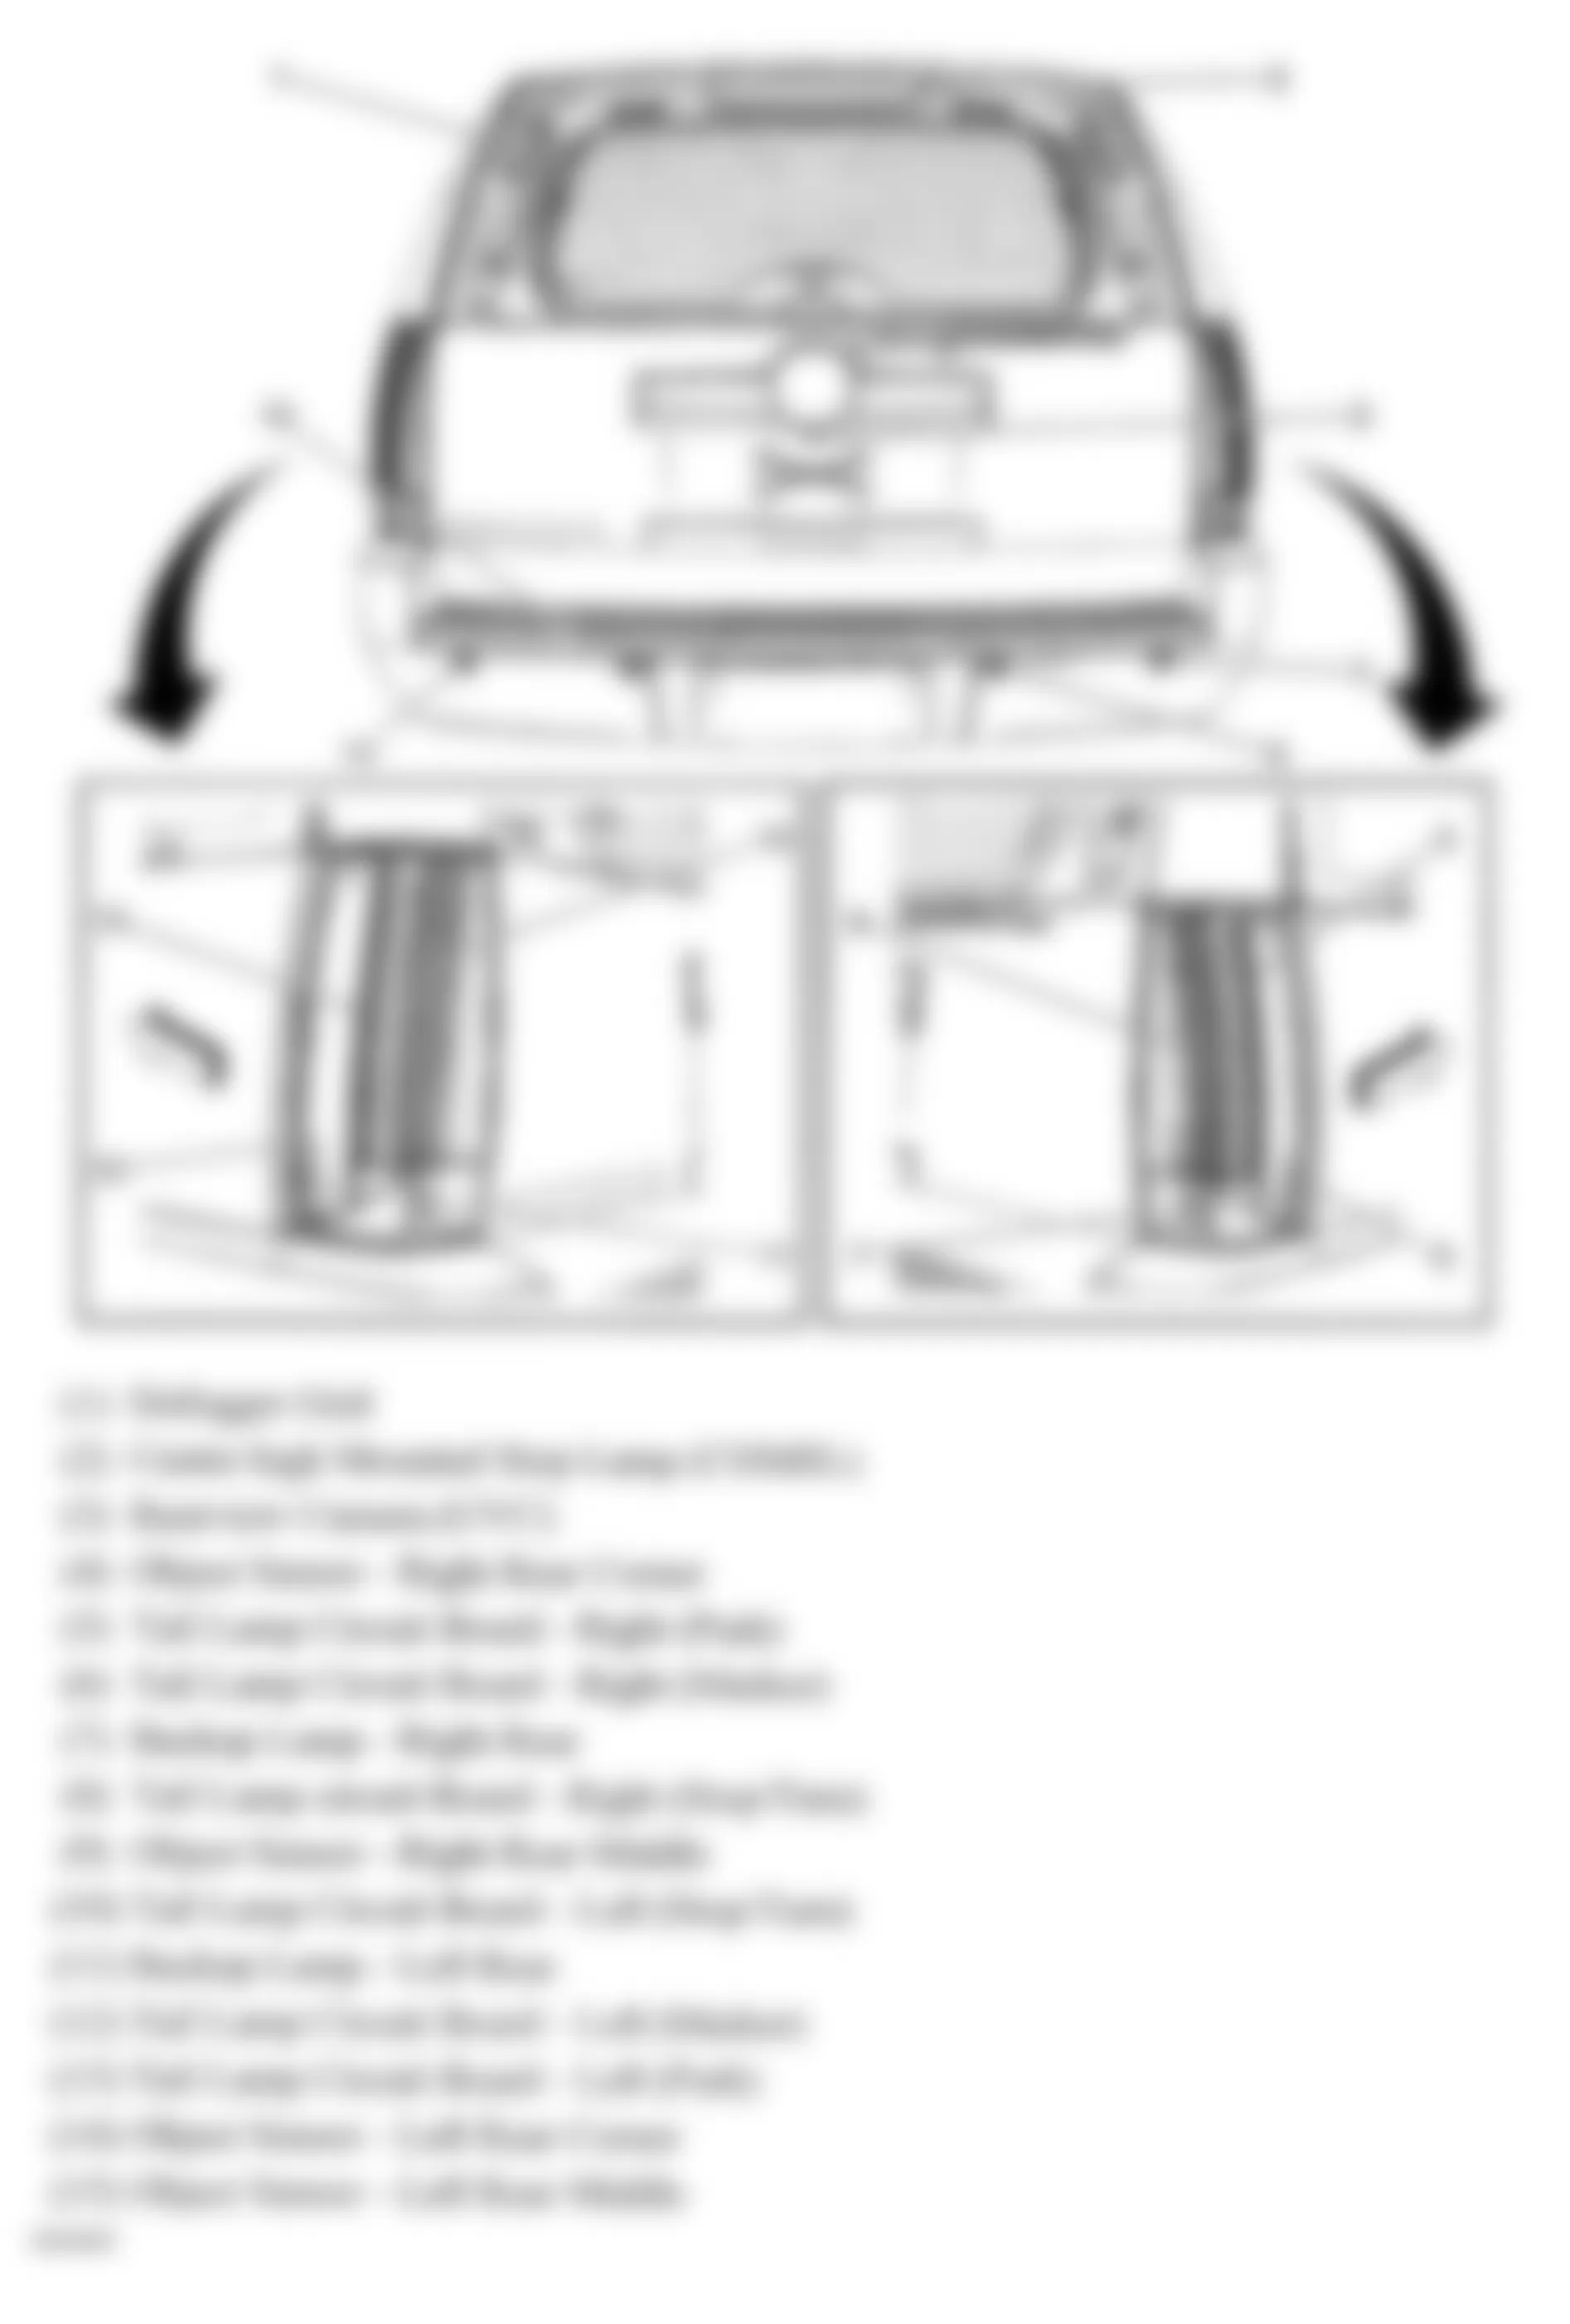 GMC Yukon Hybrid 2008 - Component Locations -  Rear Of Vehicle (Tahoe & Escalade W/One Piece Liftgate)